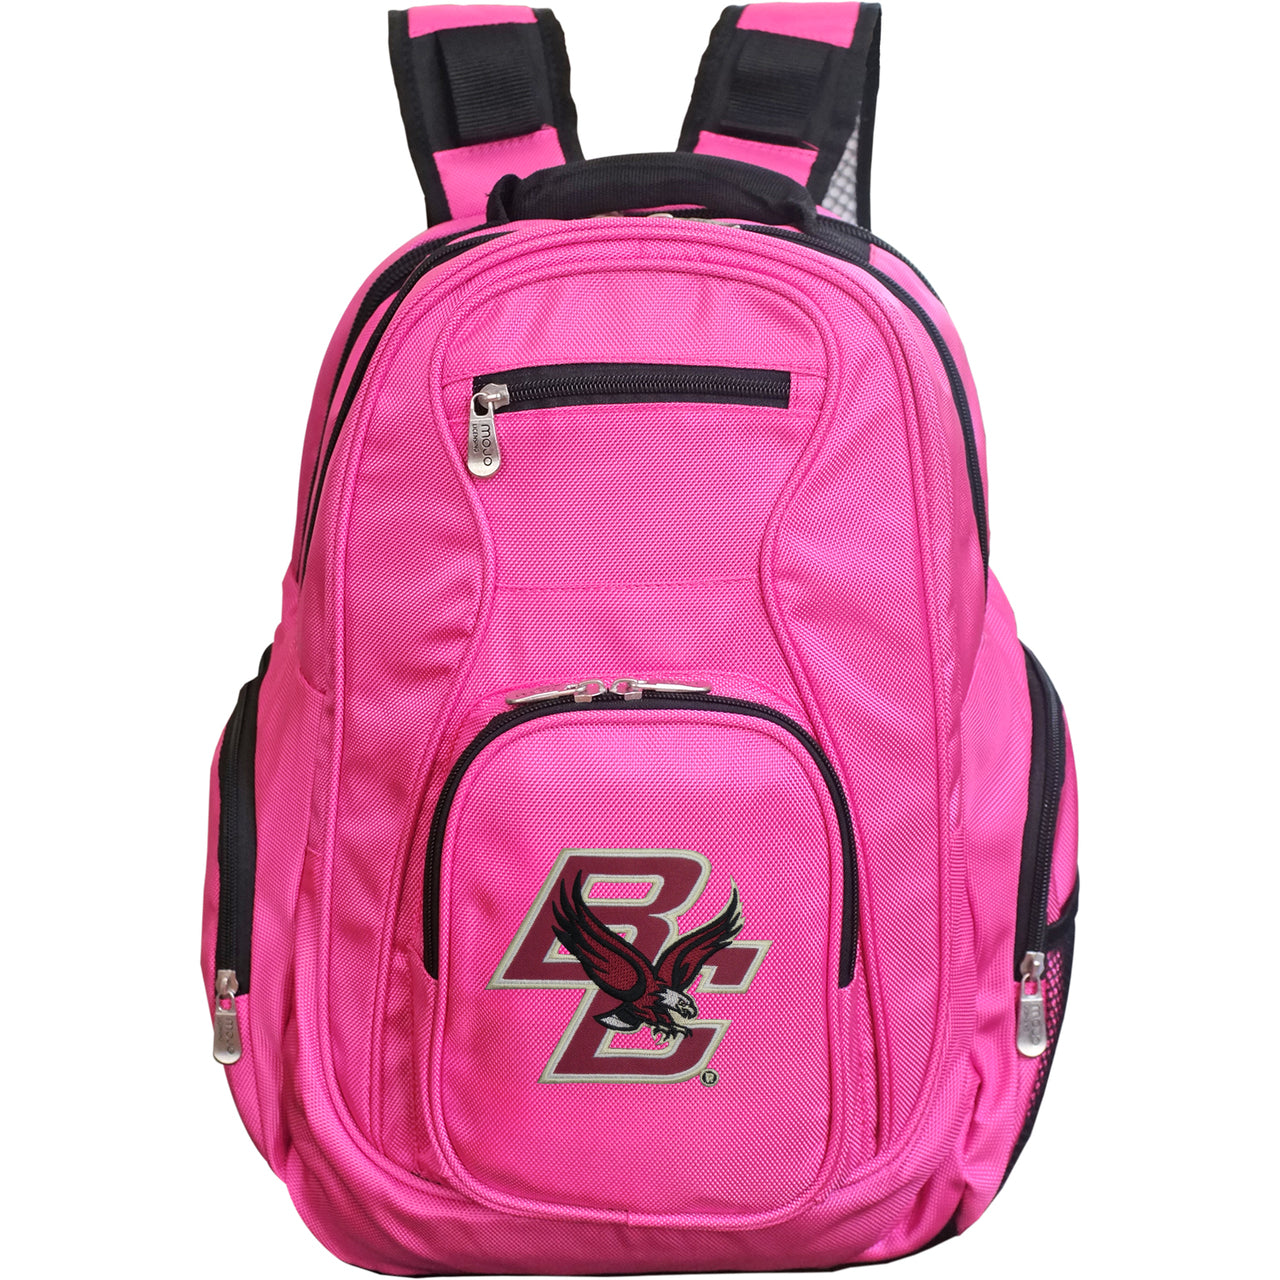 Boston College Eagles Laptop Backpack Pink